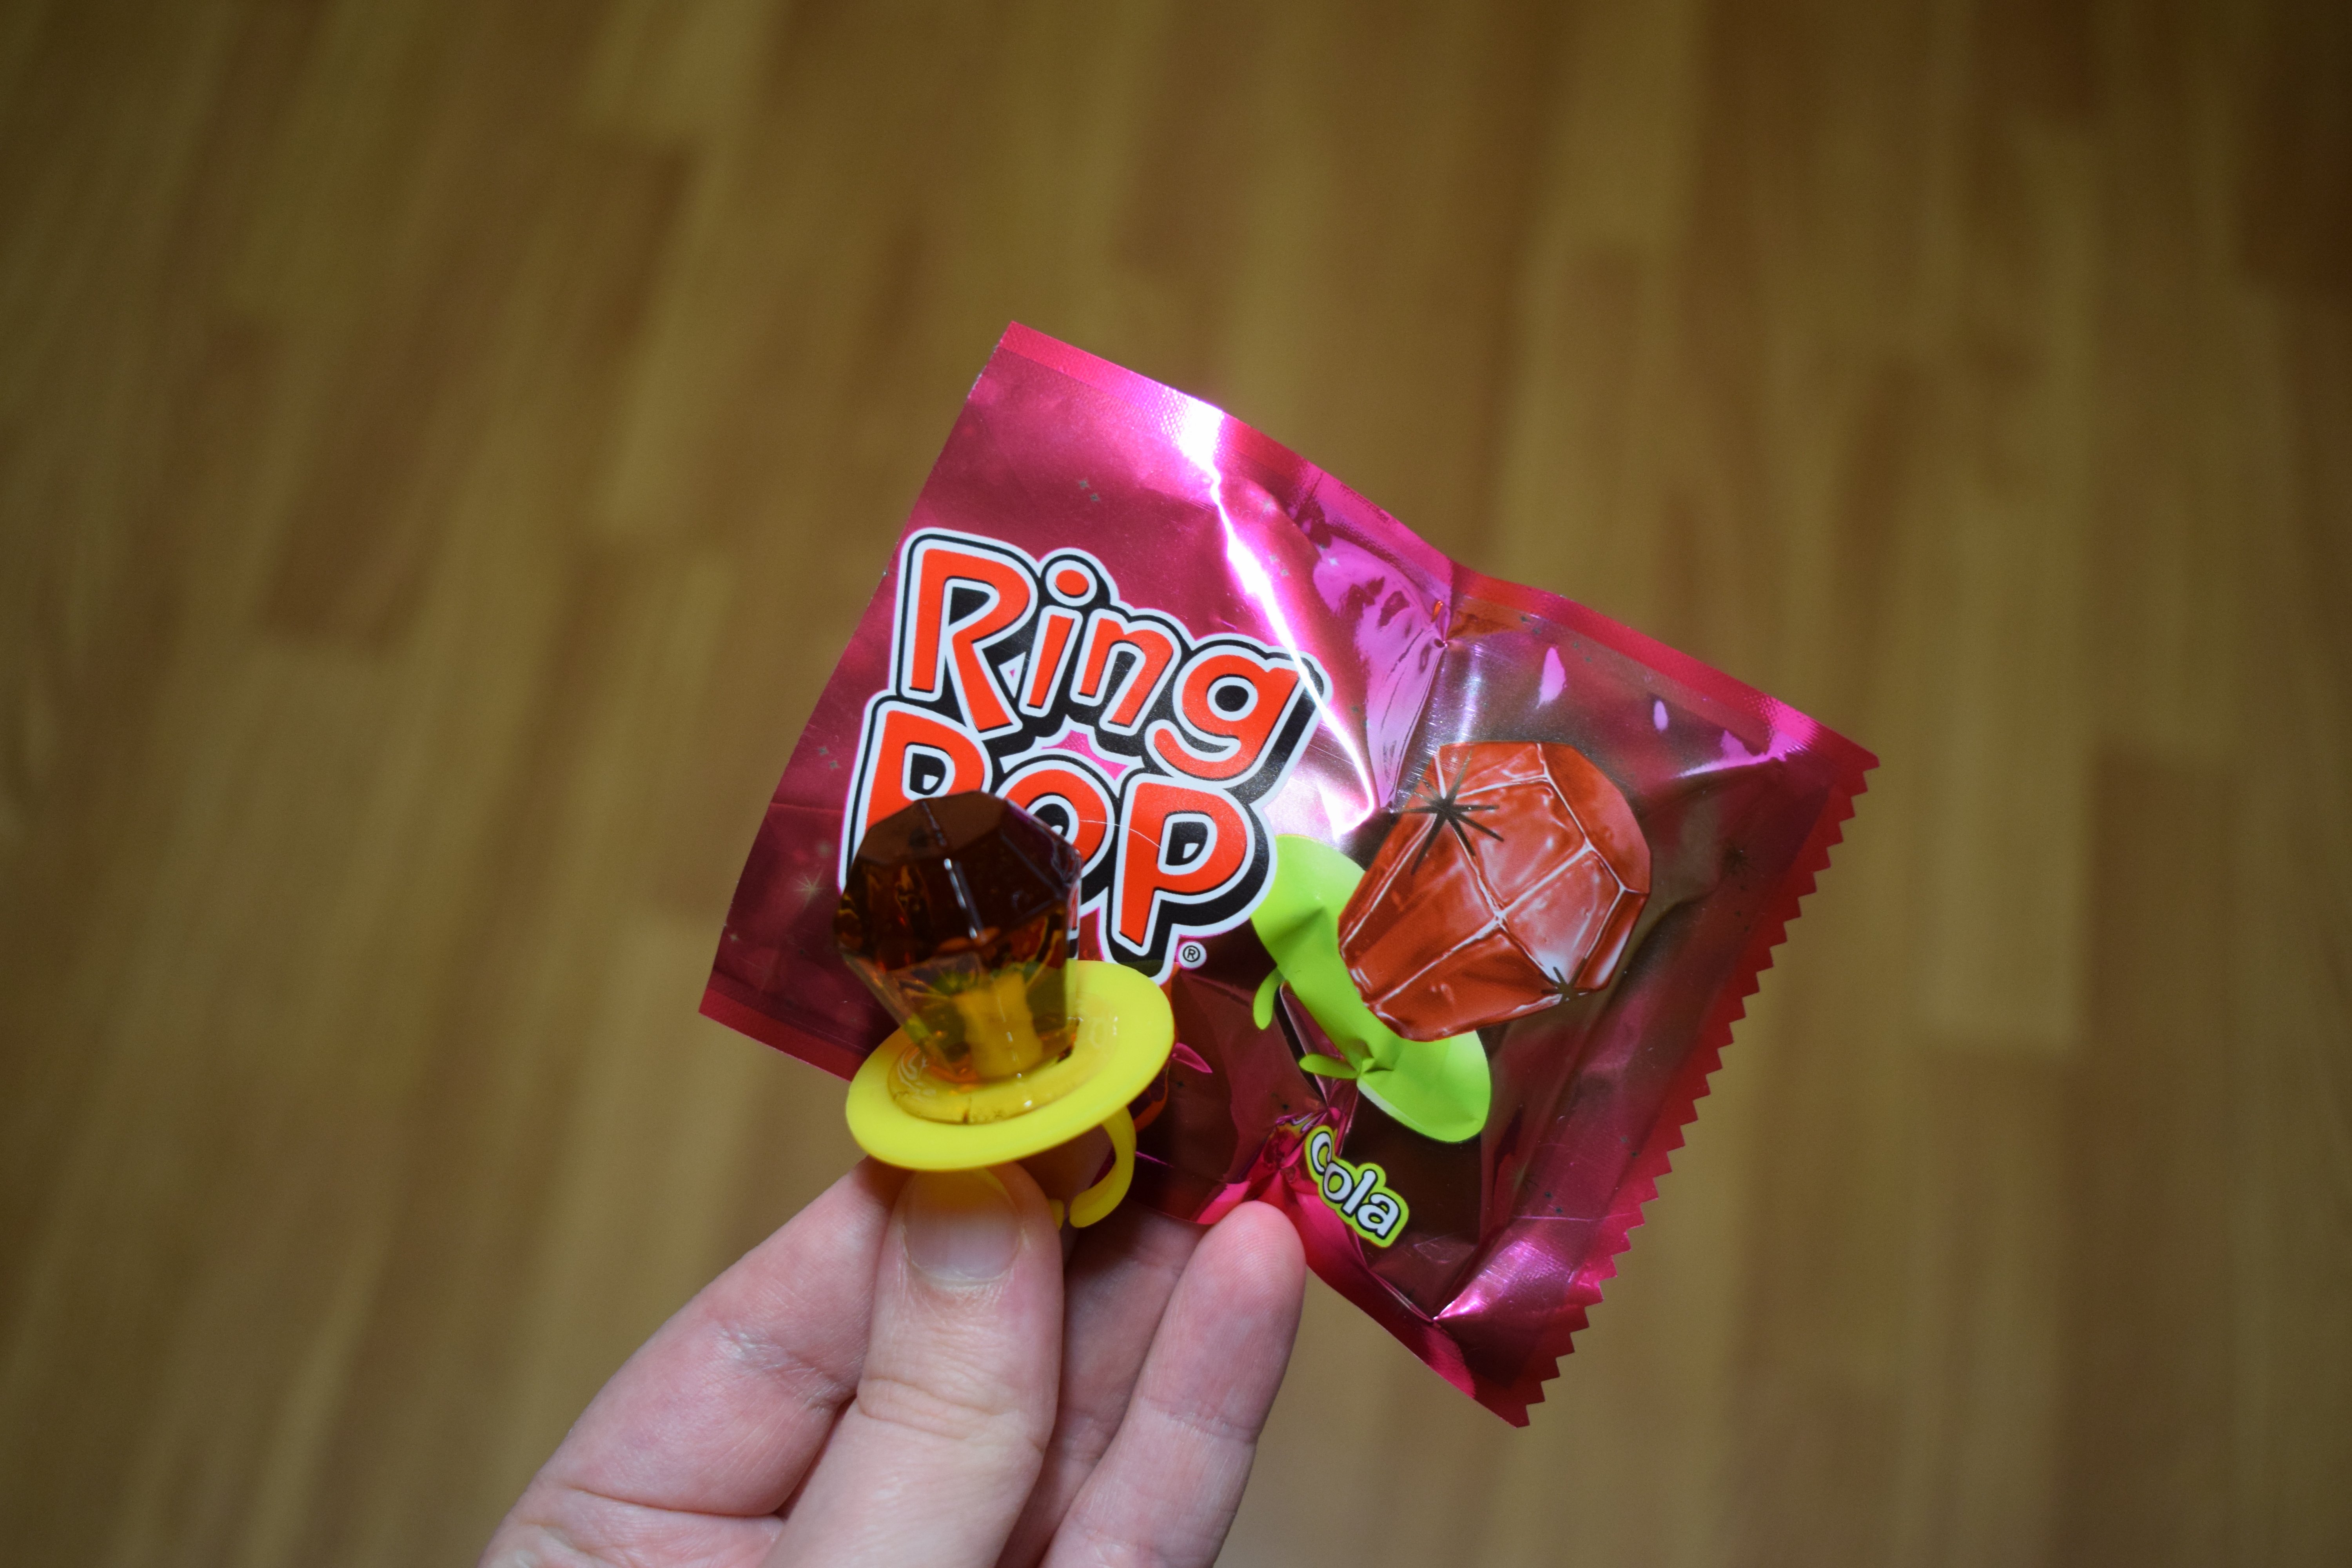 Ring Pop Cola candy product | Source: Shutterstock/SiljeAO